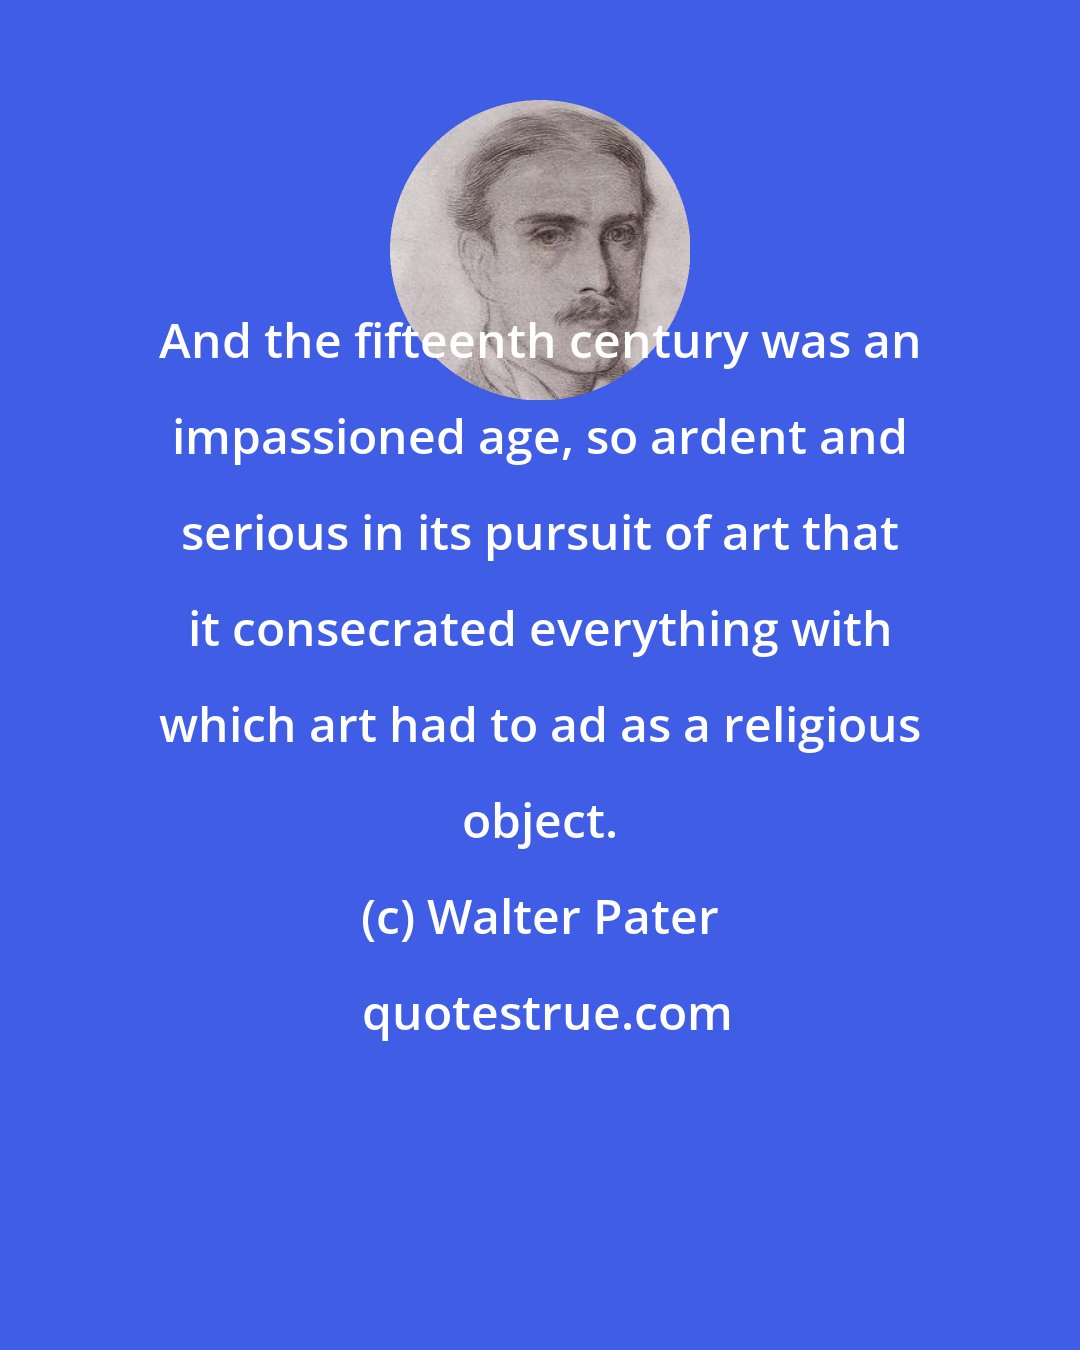 Walter Pater: And the fifteenth century was an impassioned age, so ardent and serious in its pursuit of art that it consecrated everything with which art had to ad as a religious object.